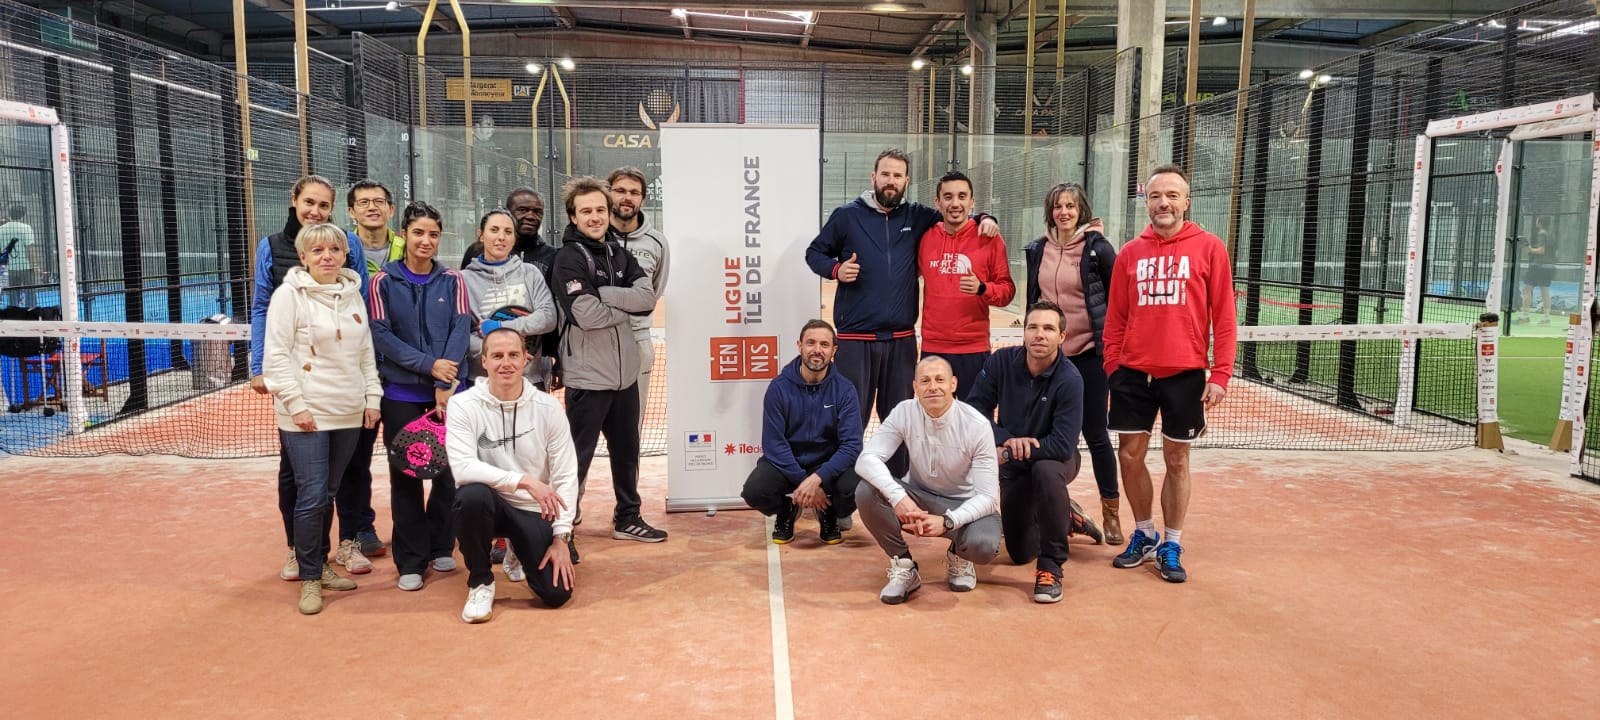 The Ile-de-France league launches the Federal Monitor Diploma Padel